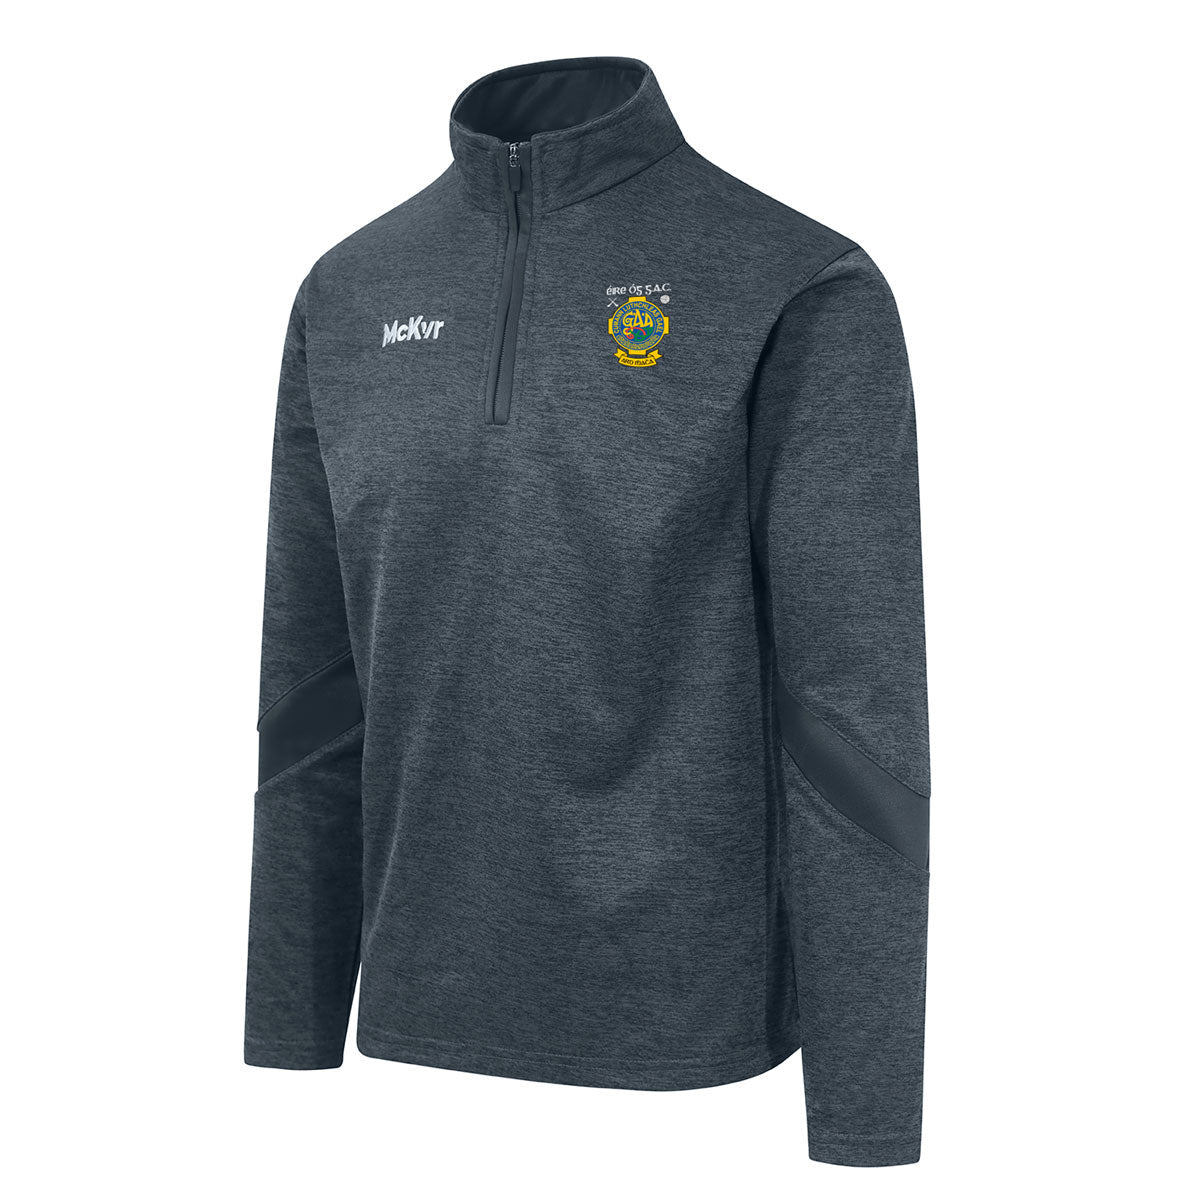 Mc Keever Eire Og GAC Craigavon Core 22 1/4 Zip Top - Youth - Charcoal